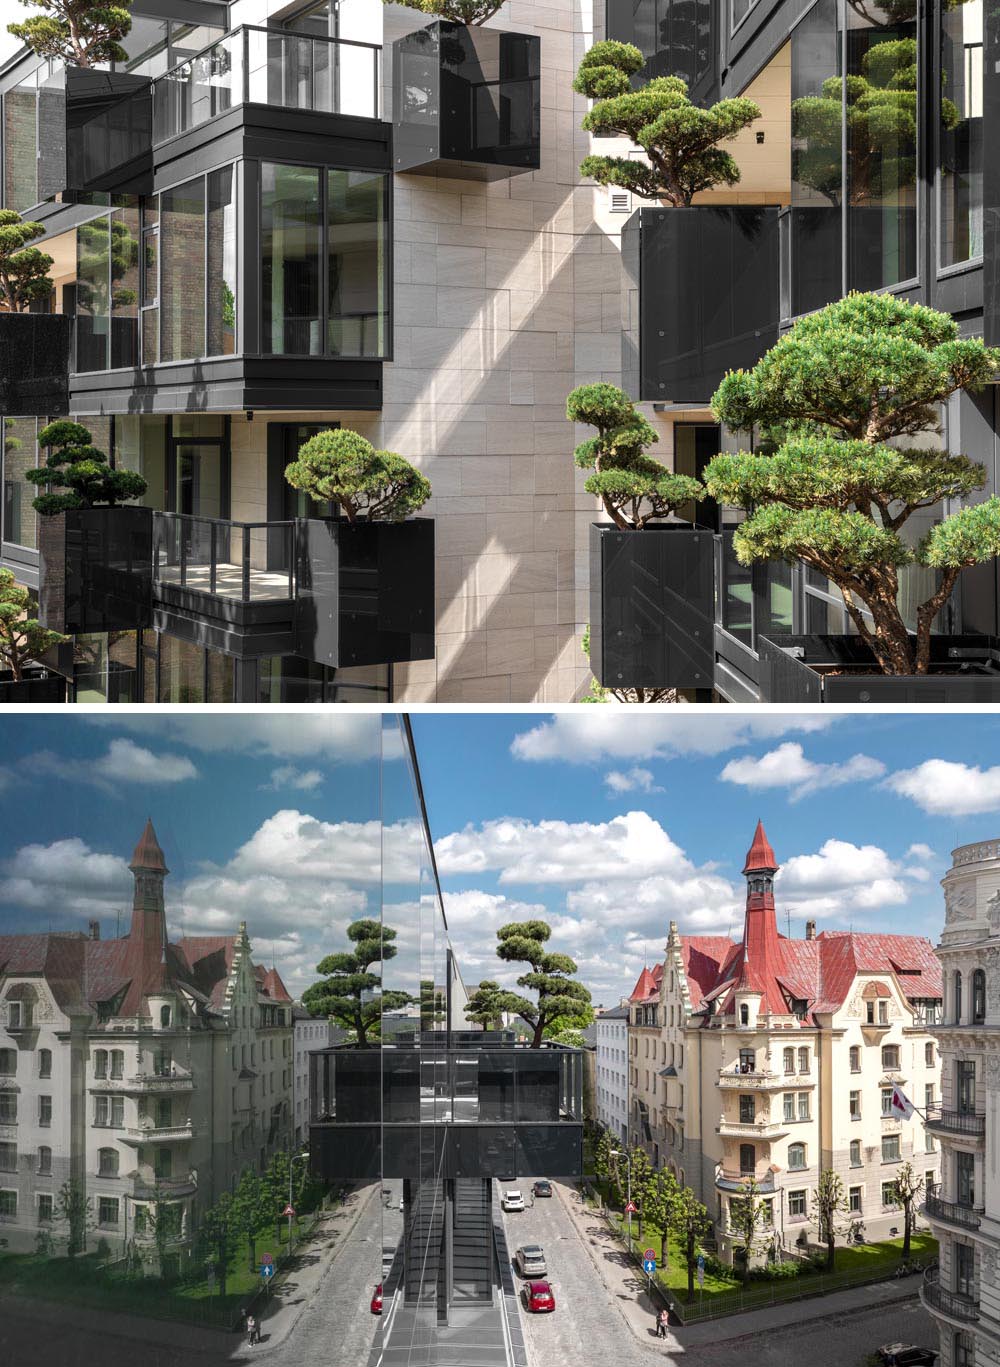 As part of the design of the new exterior of this apartment building, ‘flying’ conifers and bonsai trees were placed in cantilevered planters.